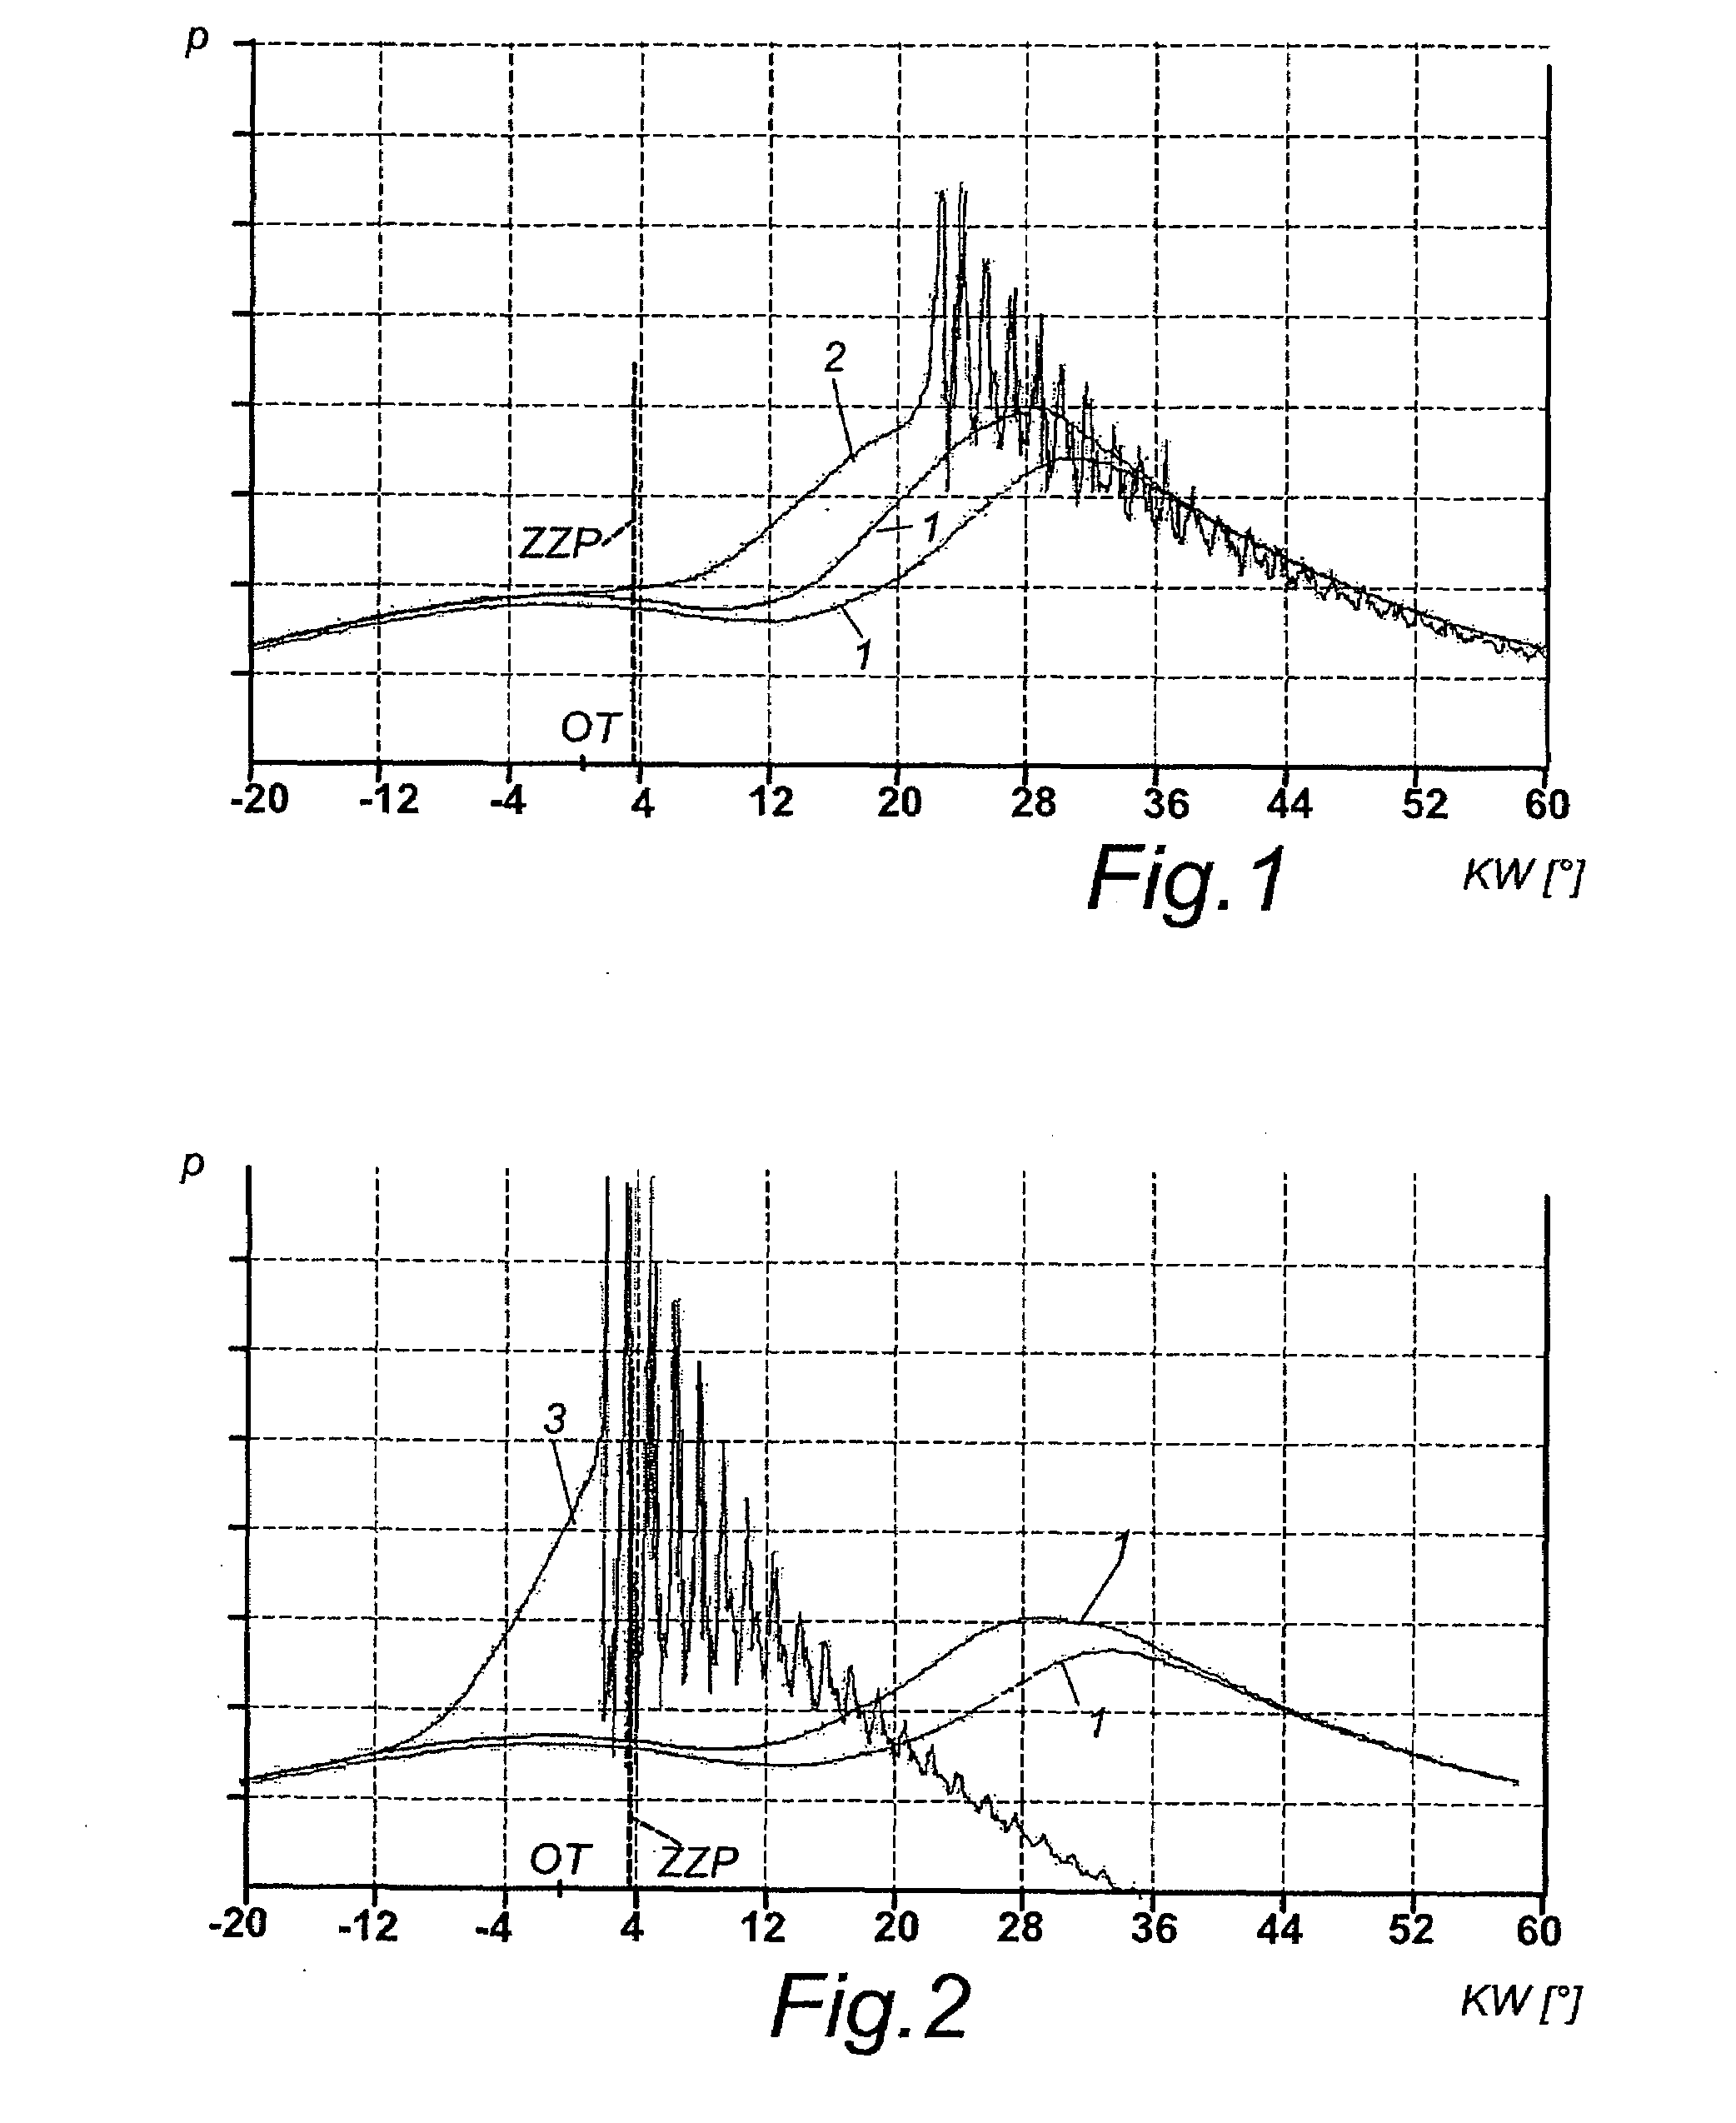 Method to recognize and avoid premature combustion events